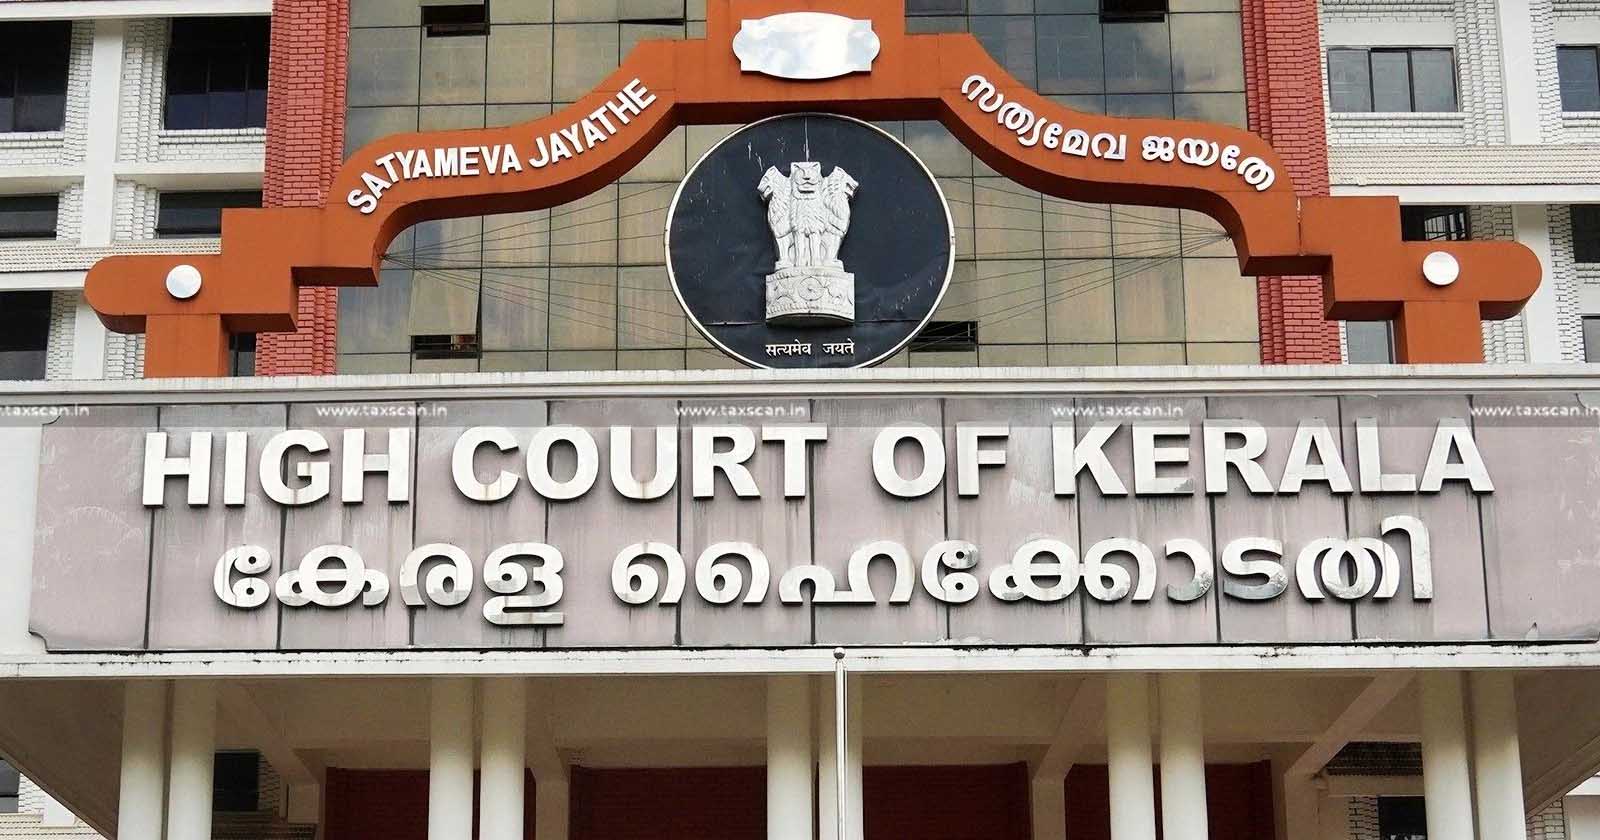 Non-Payment - Kerala Legal Benefit Fund - Kerala High Court - GST Appellate Authorities - GST - Appeal - Payment - Taxscan